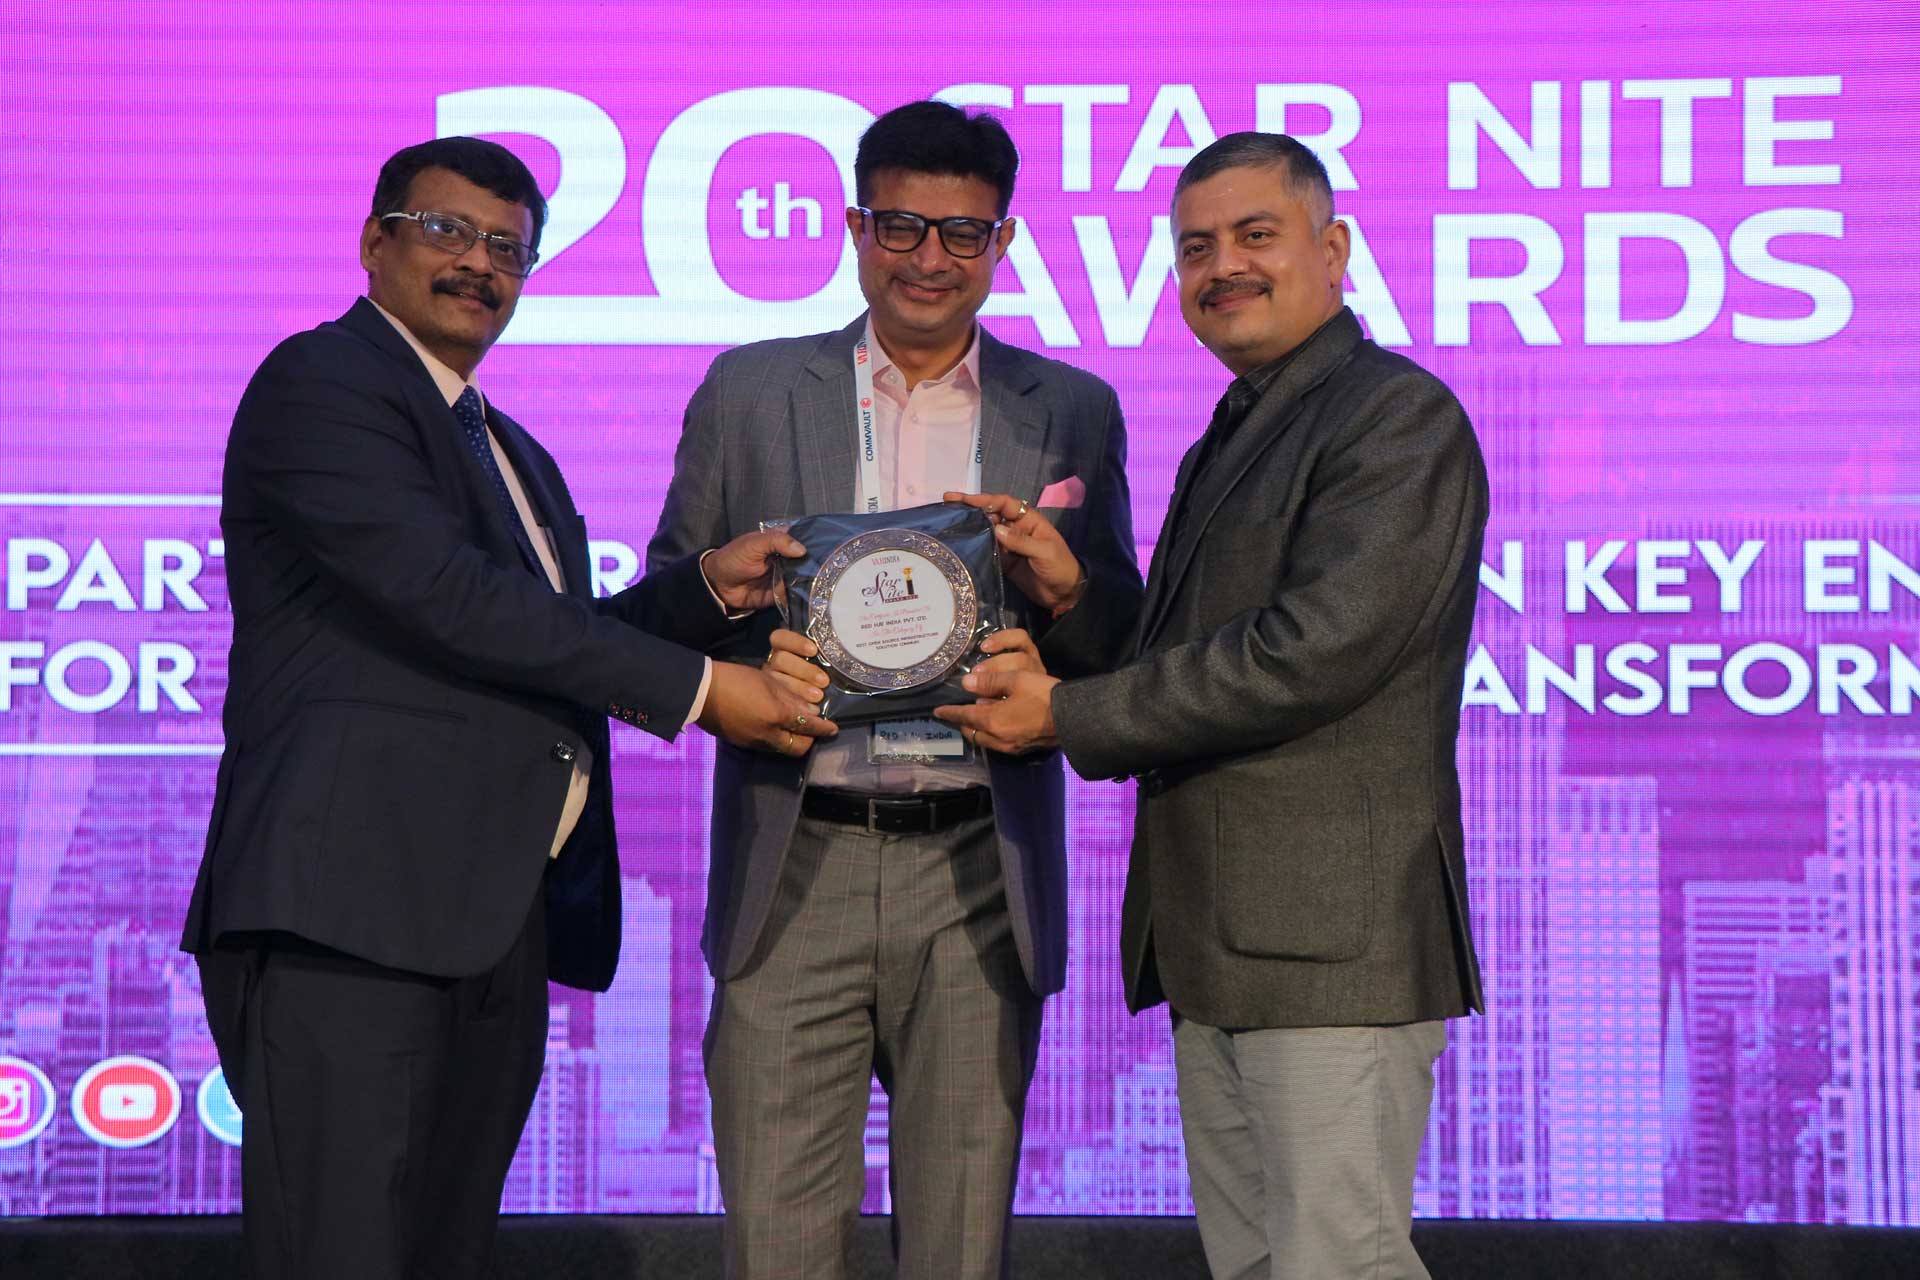 Best Open Source Infrastructure Solution Company Award goes to REDHAT India Pvt Ltd at 20th Star Nite Awards 2021